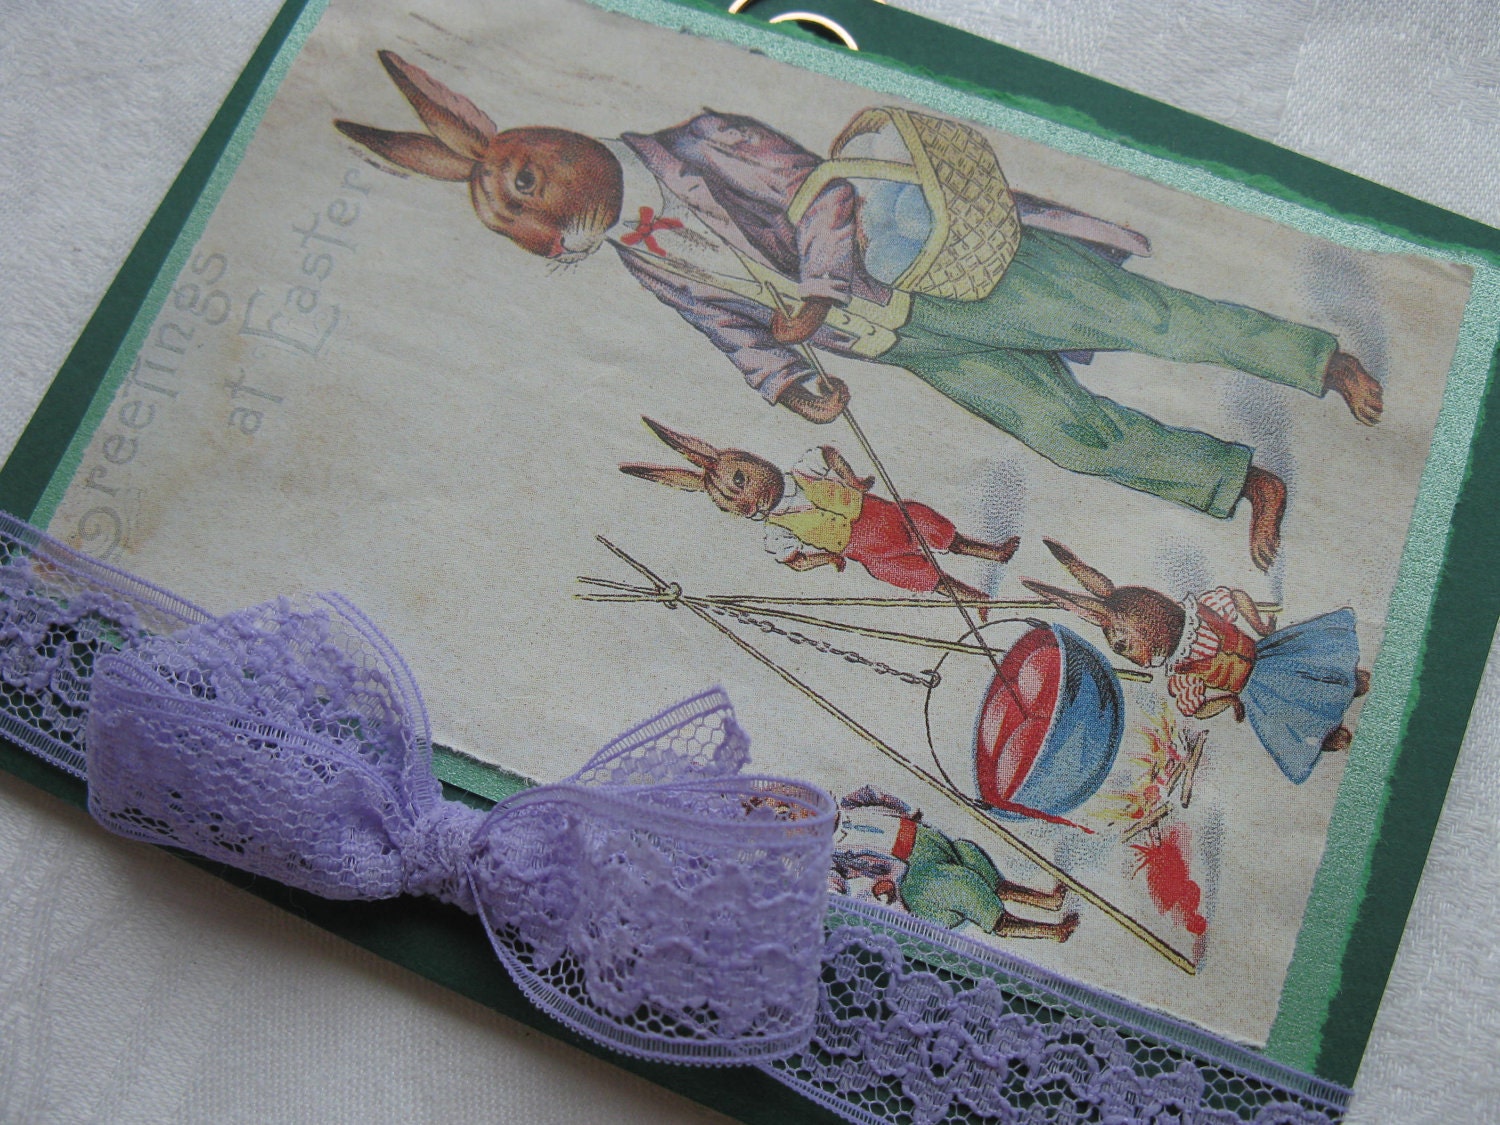 Handmade Easter Card with Repro Vintage Print of Easter Bunny Family Lavender and Green